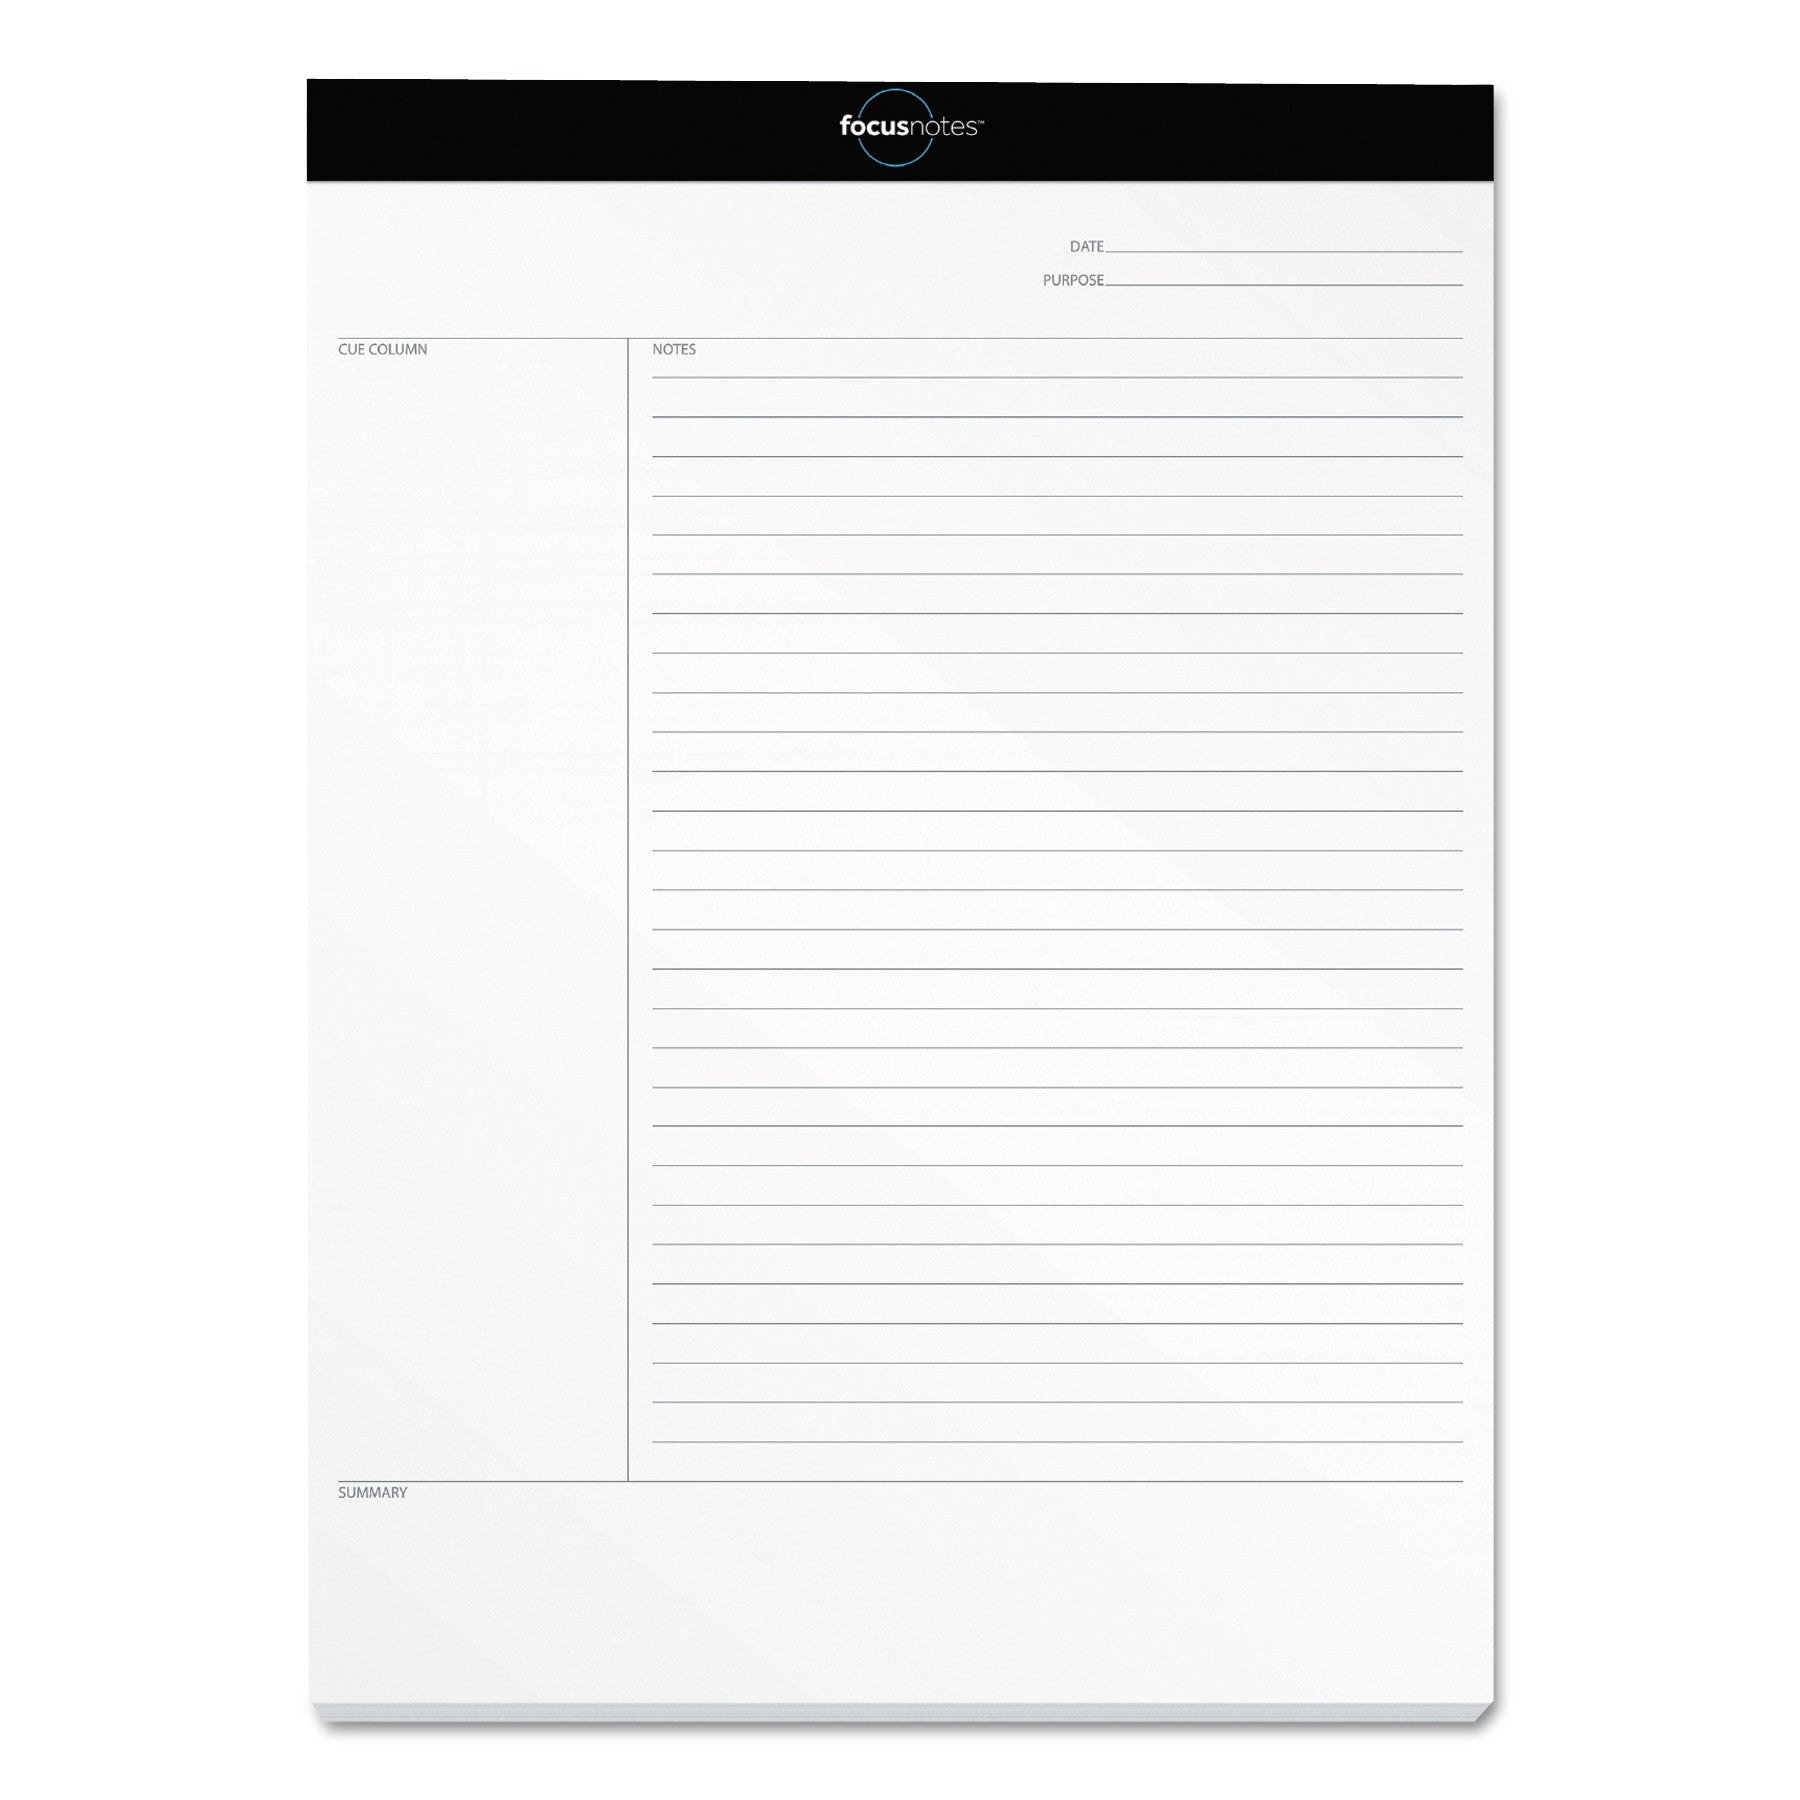 FocusNotes Legal Pad, Meeting-Minutes/Notes Format, 50 White 8.5 x 11.75 Sheets - 